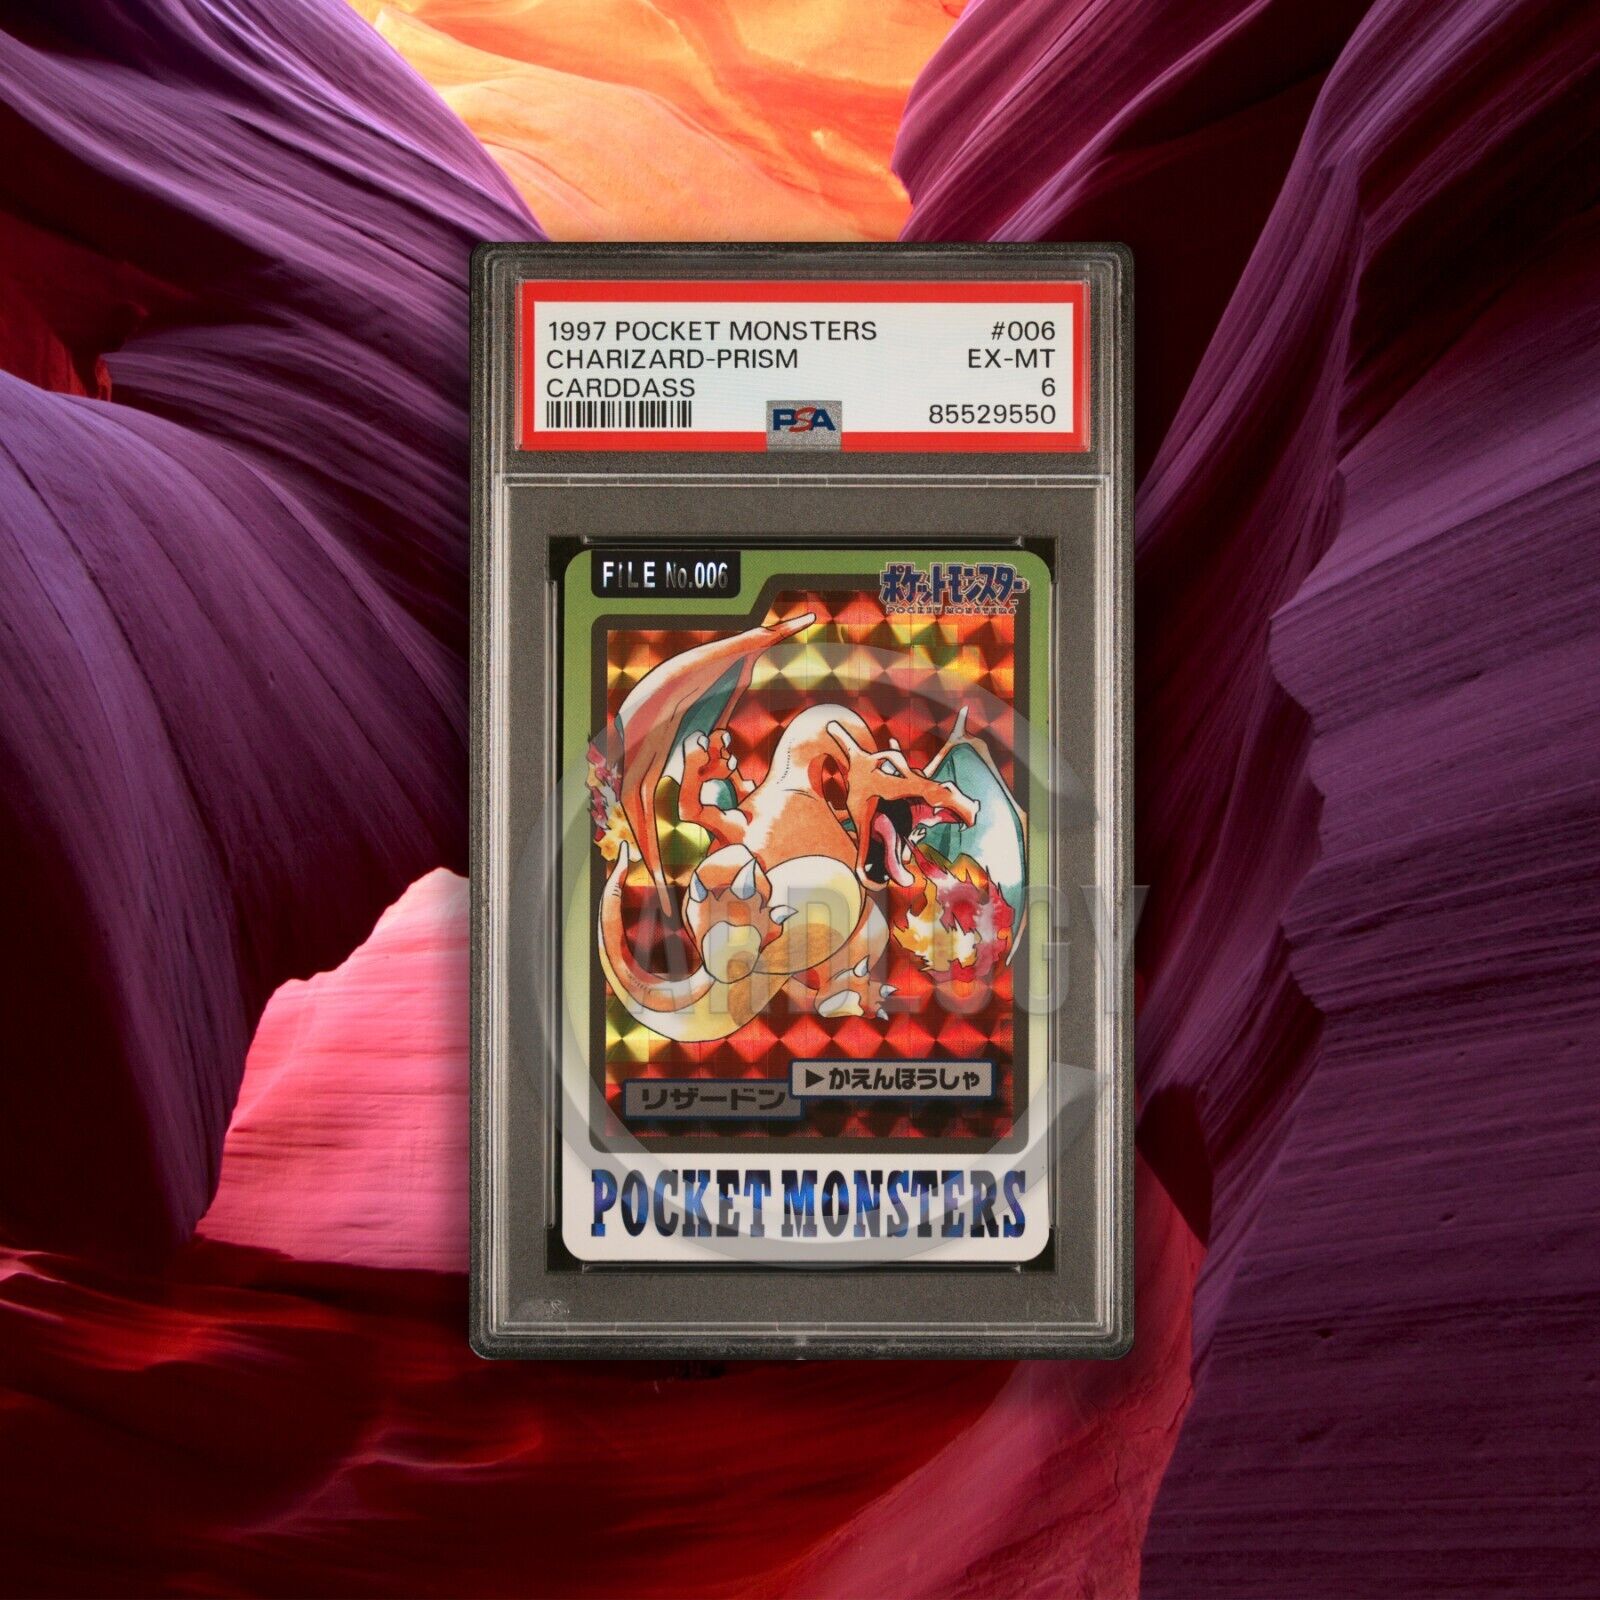 1997 POCKET MONSTERS CARDDASS 006 CHARIZARD-PRISM PSA 6